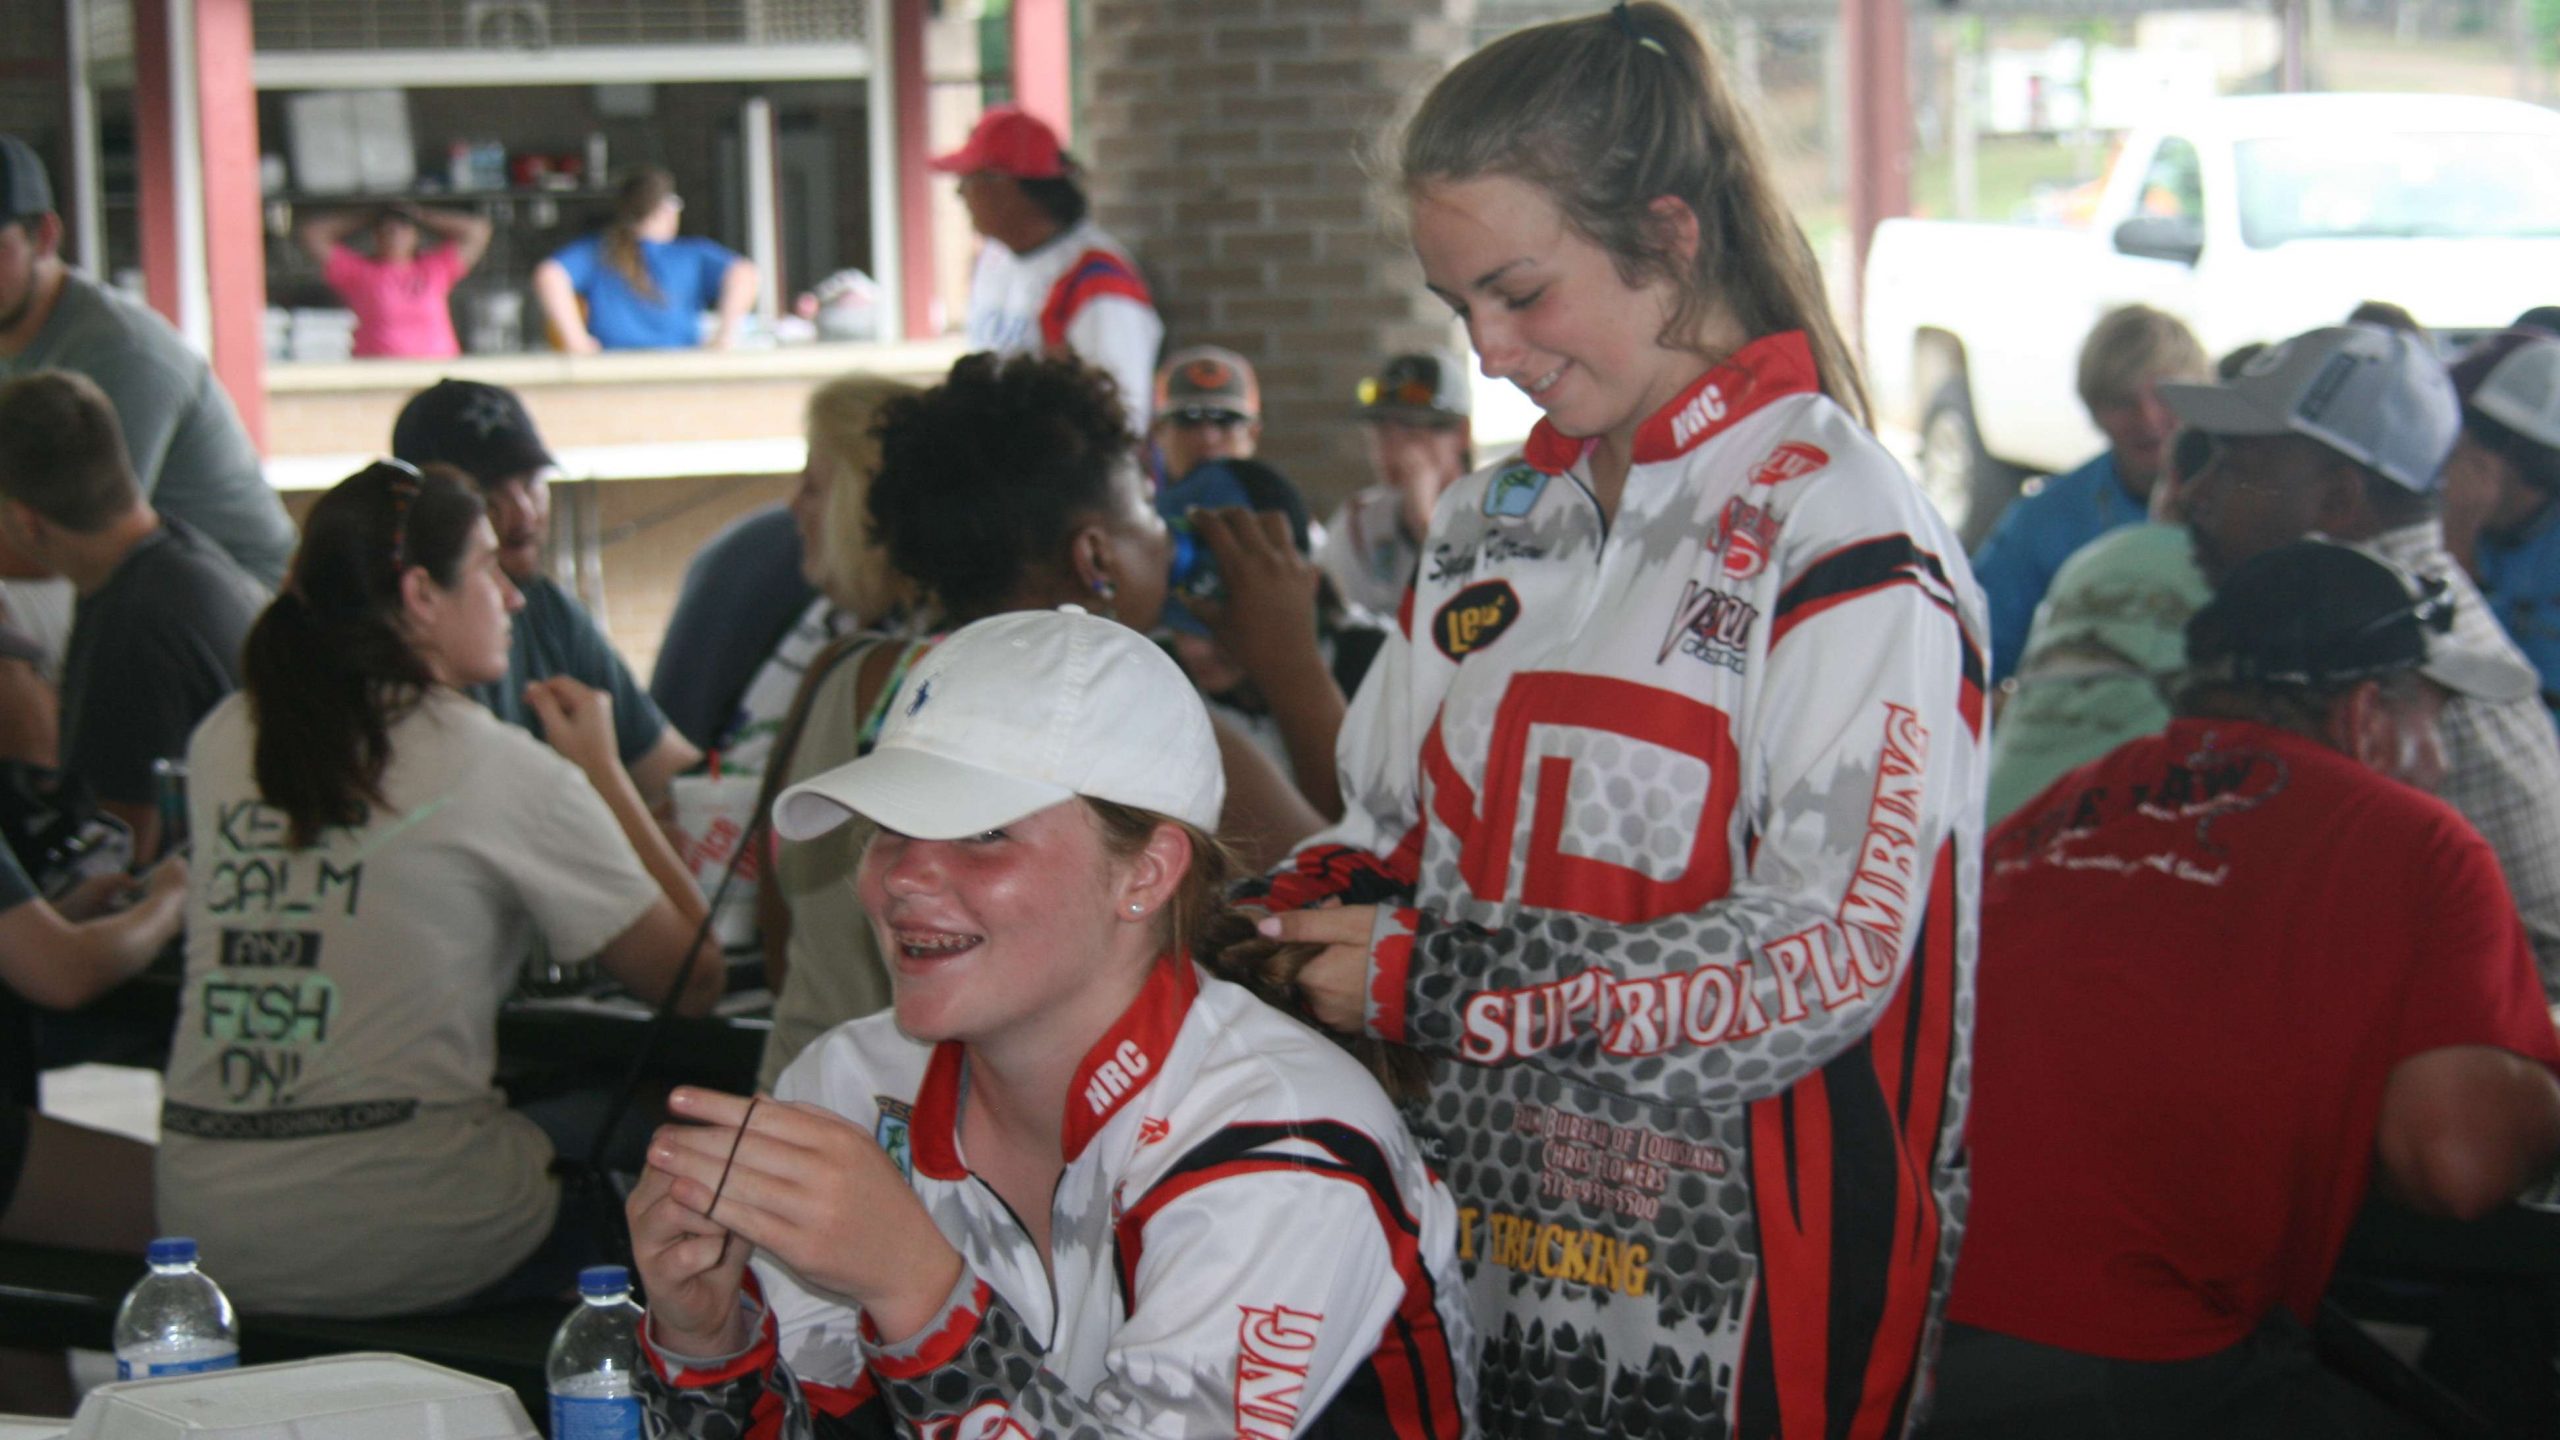 Erin Meeks has her hair braided by Sydney Peterson, both of North DeSoto (Louisiana) High School, as they await tournament director Hank Weldon to take the stage for the anglers' meeting.